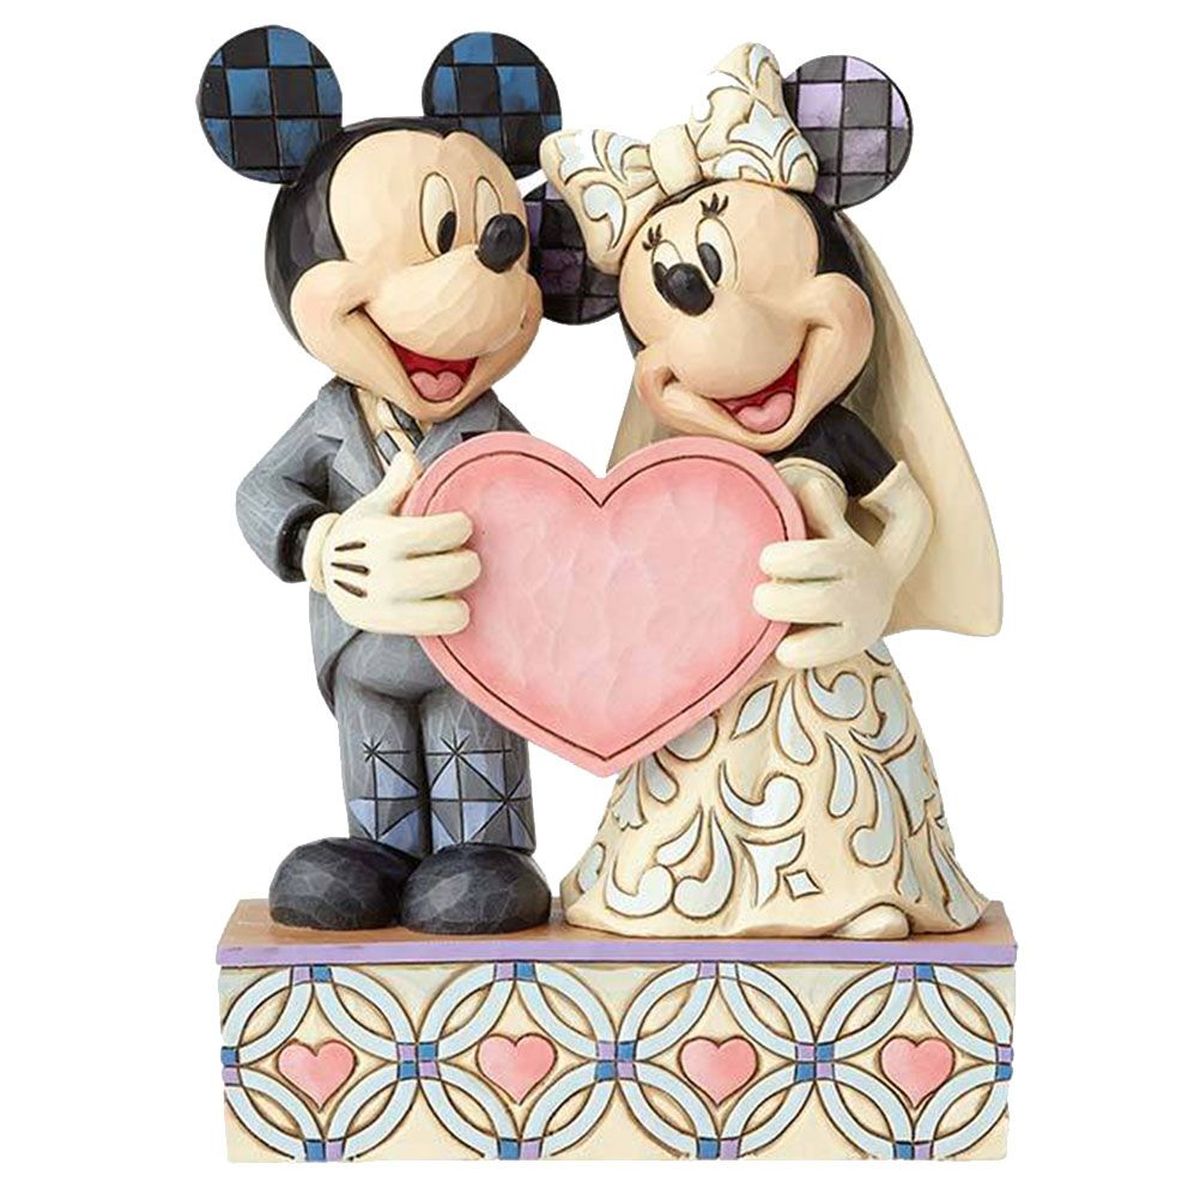 Figurine Mickey et Minnie Mariage Disney Traditions collection